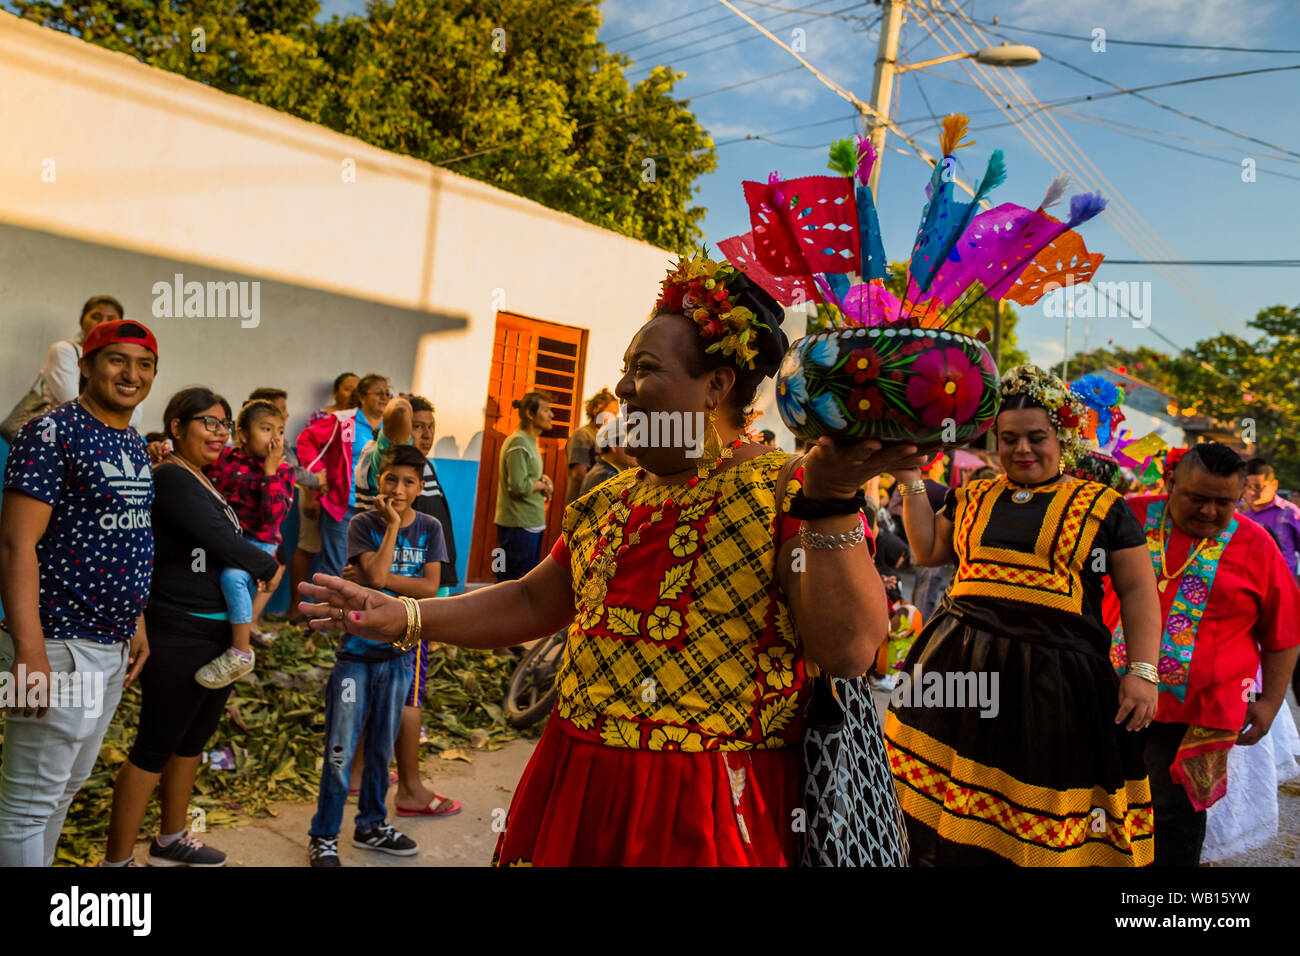 A Mexican “muxe” (typically, a homosexual man wearing female clothes) greets the public during the festival in Juchitán de Zaragoza, Mexico. Stock Photo